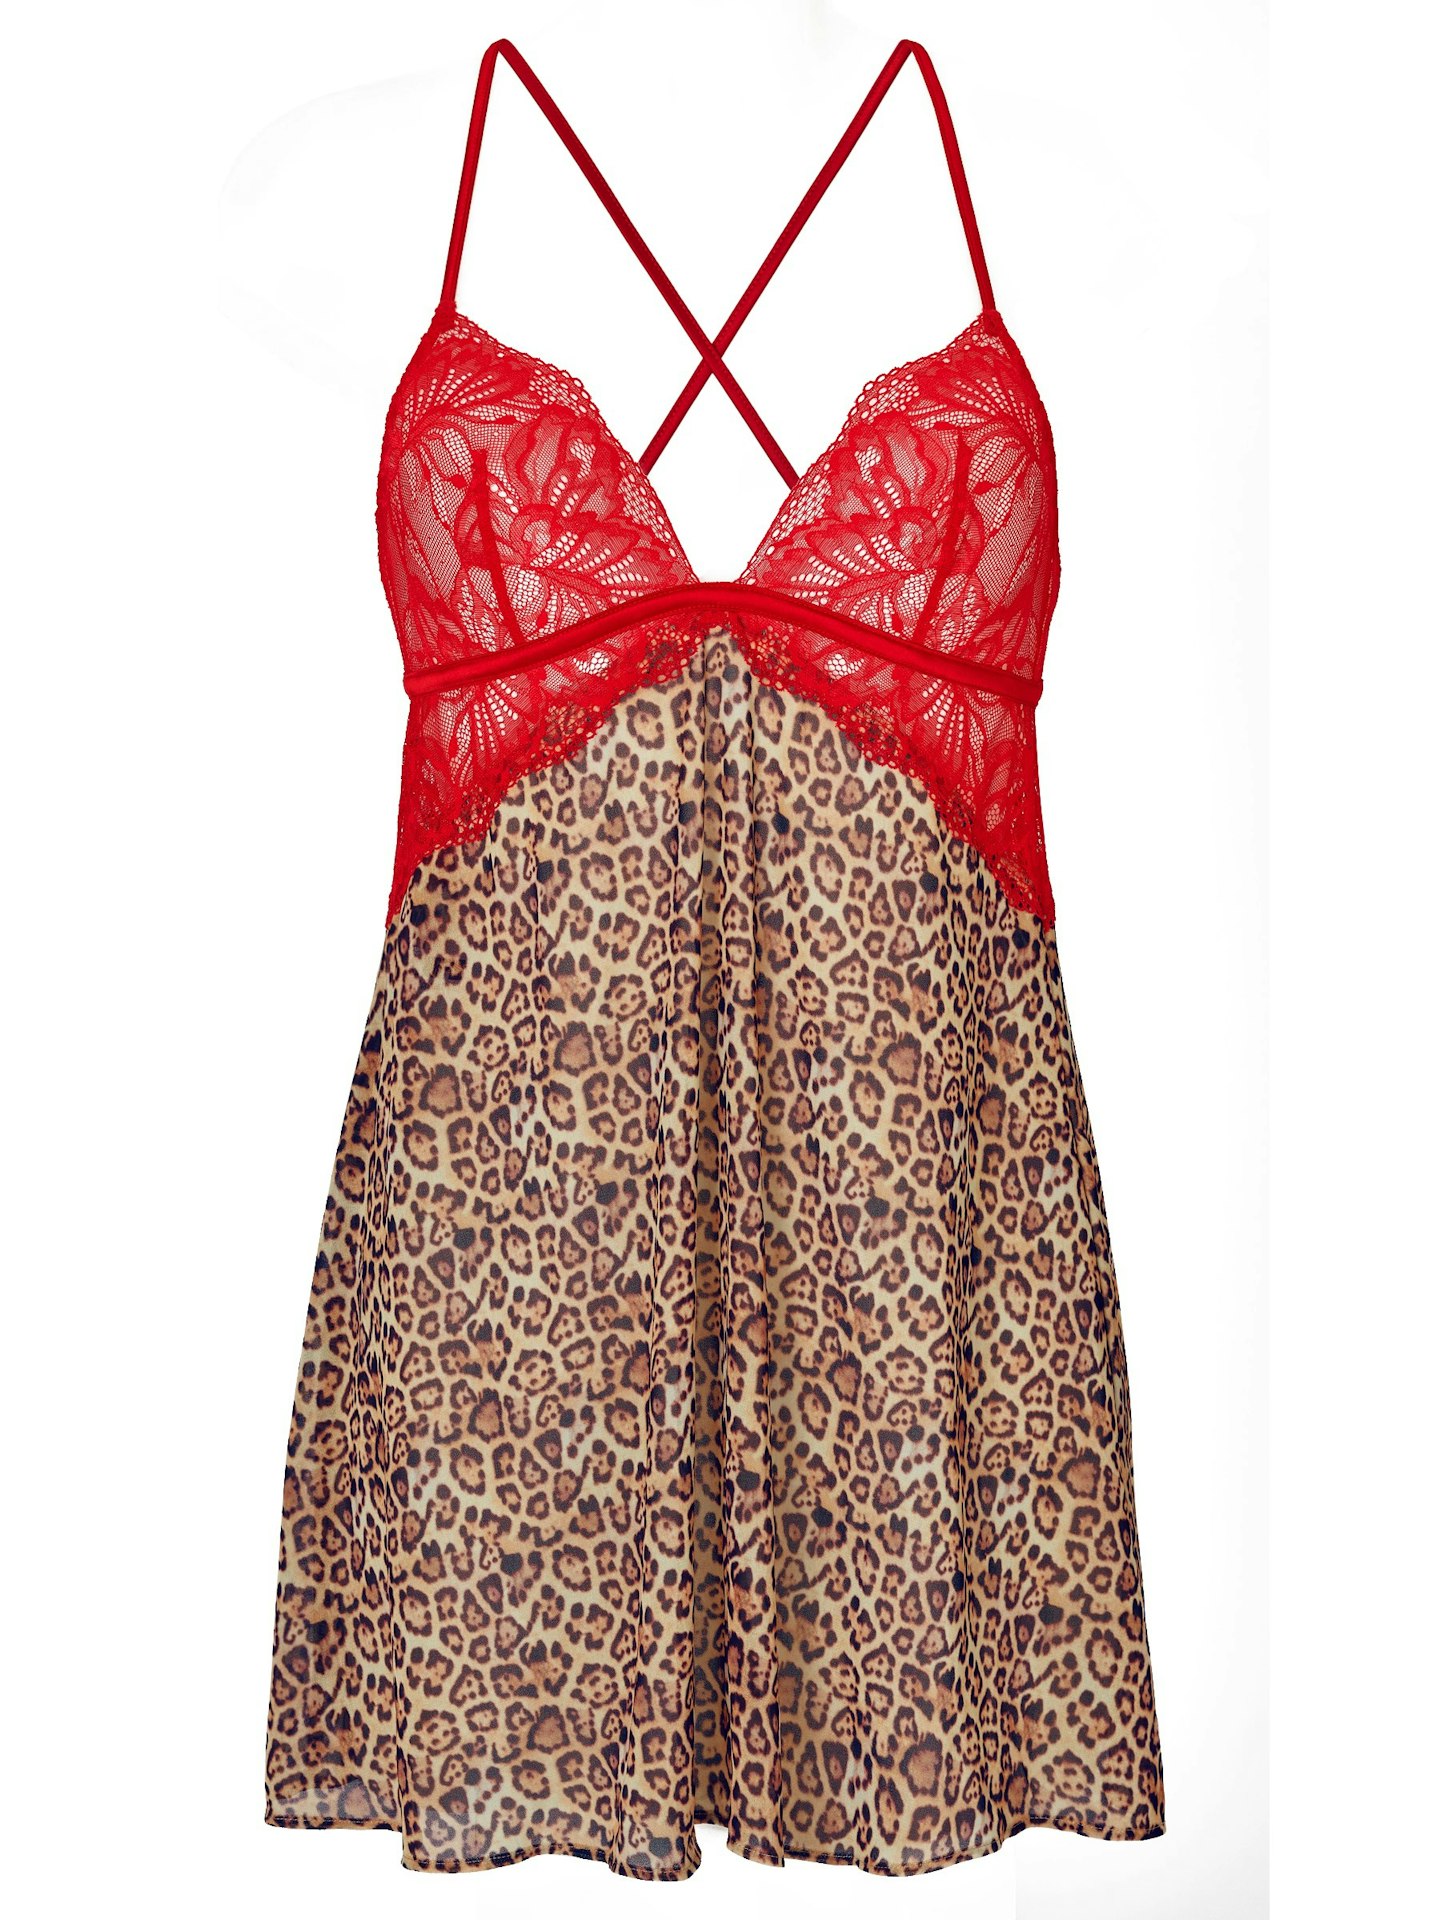 Ann Summers red lace and leopard print chemise